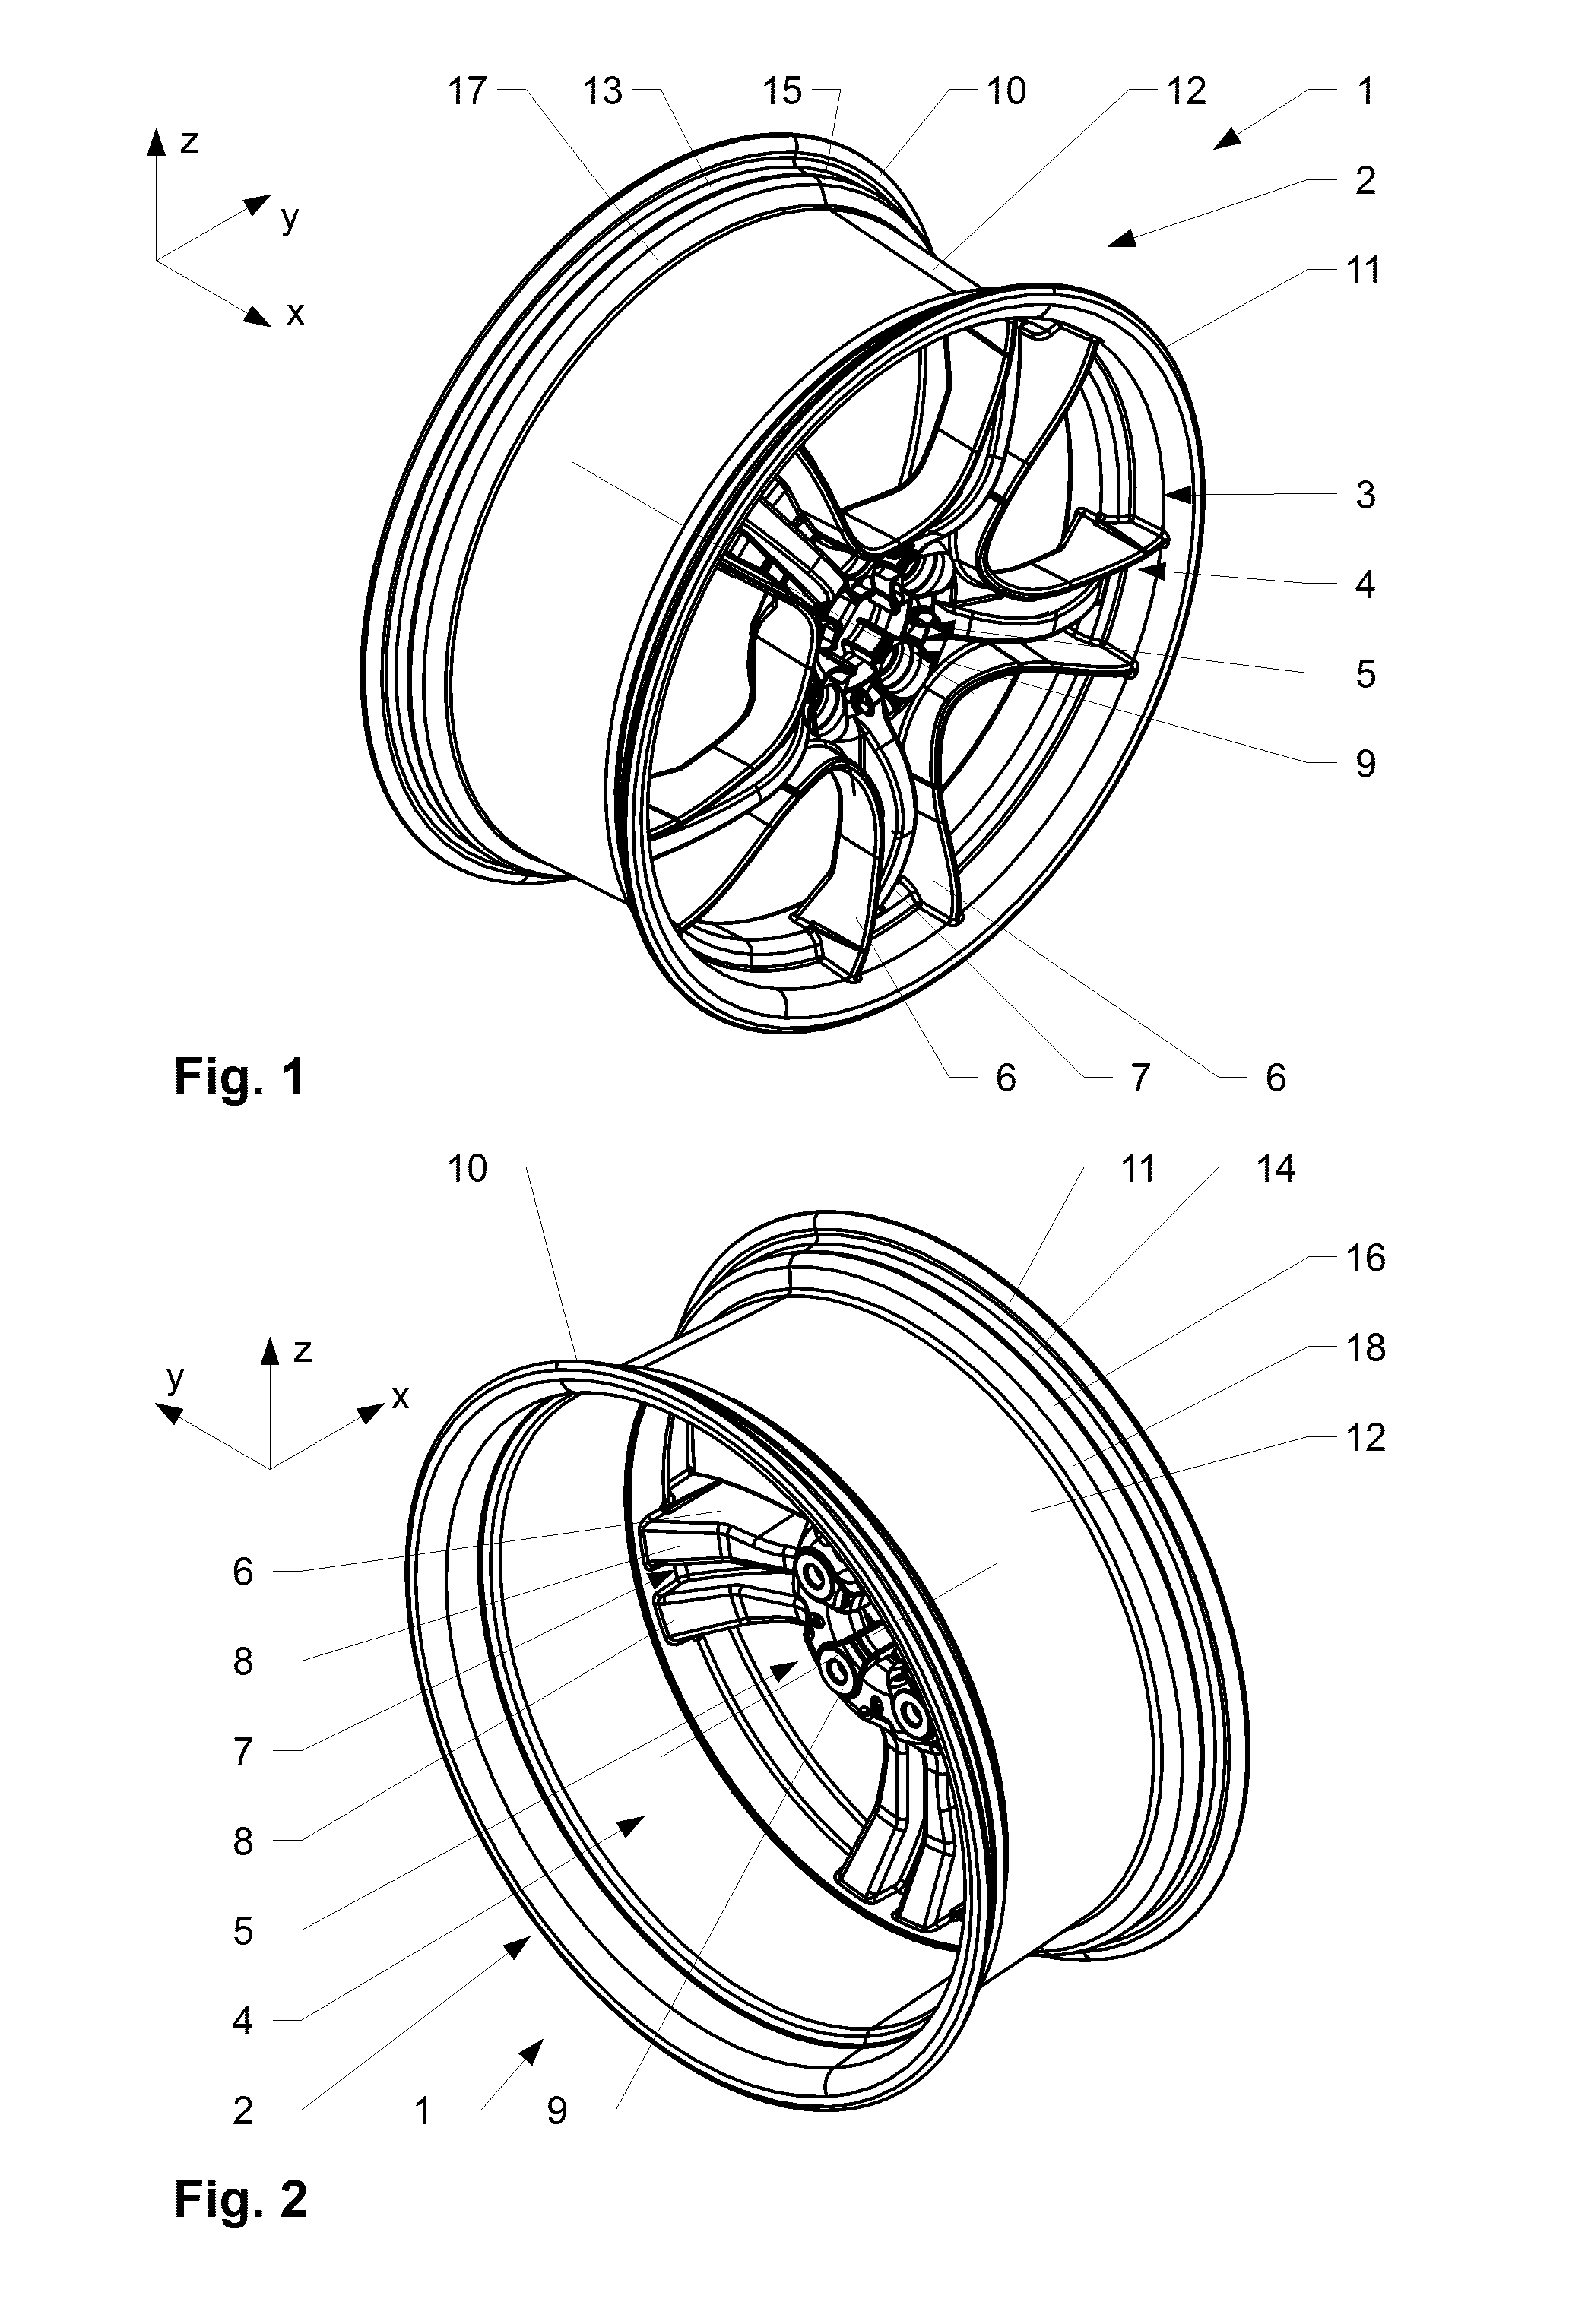 Wheel made out of a fiber reinforced plastic material